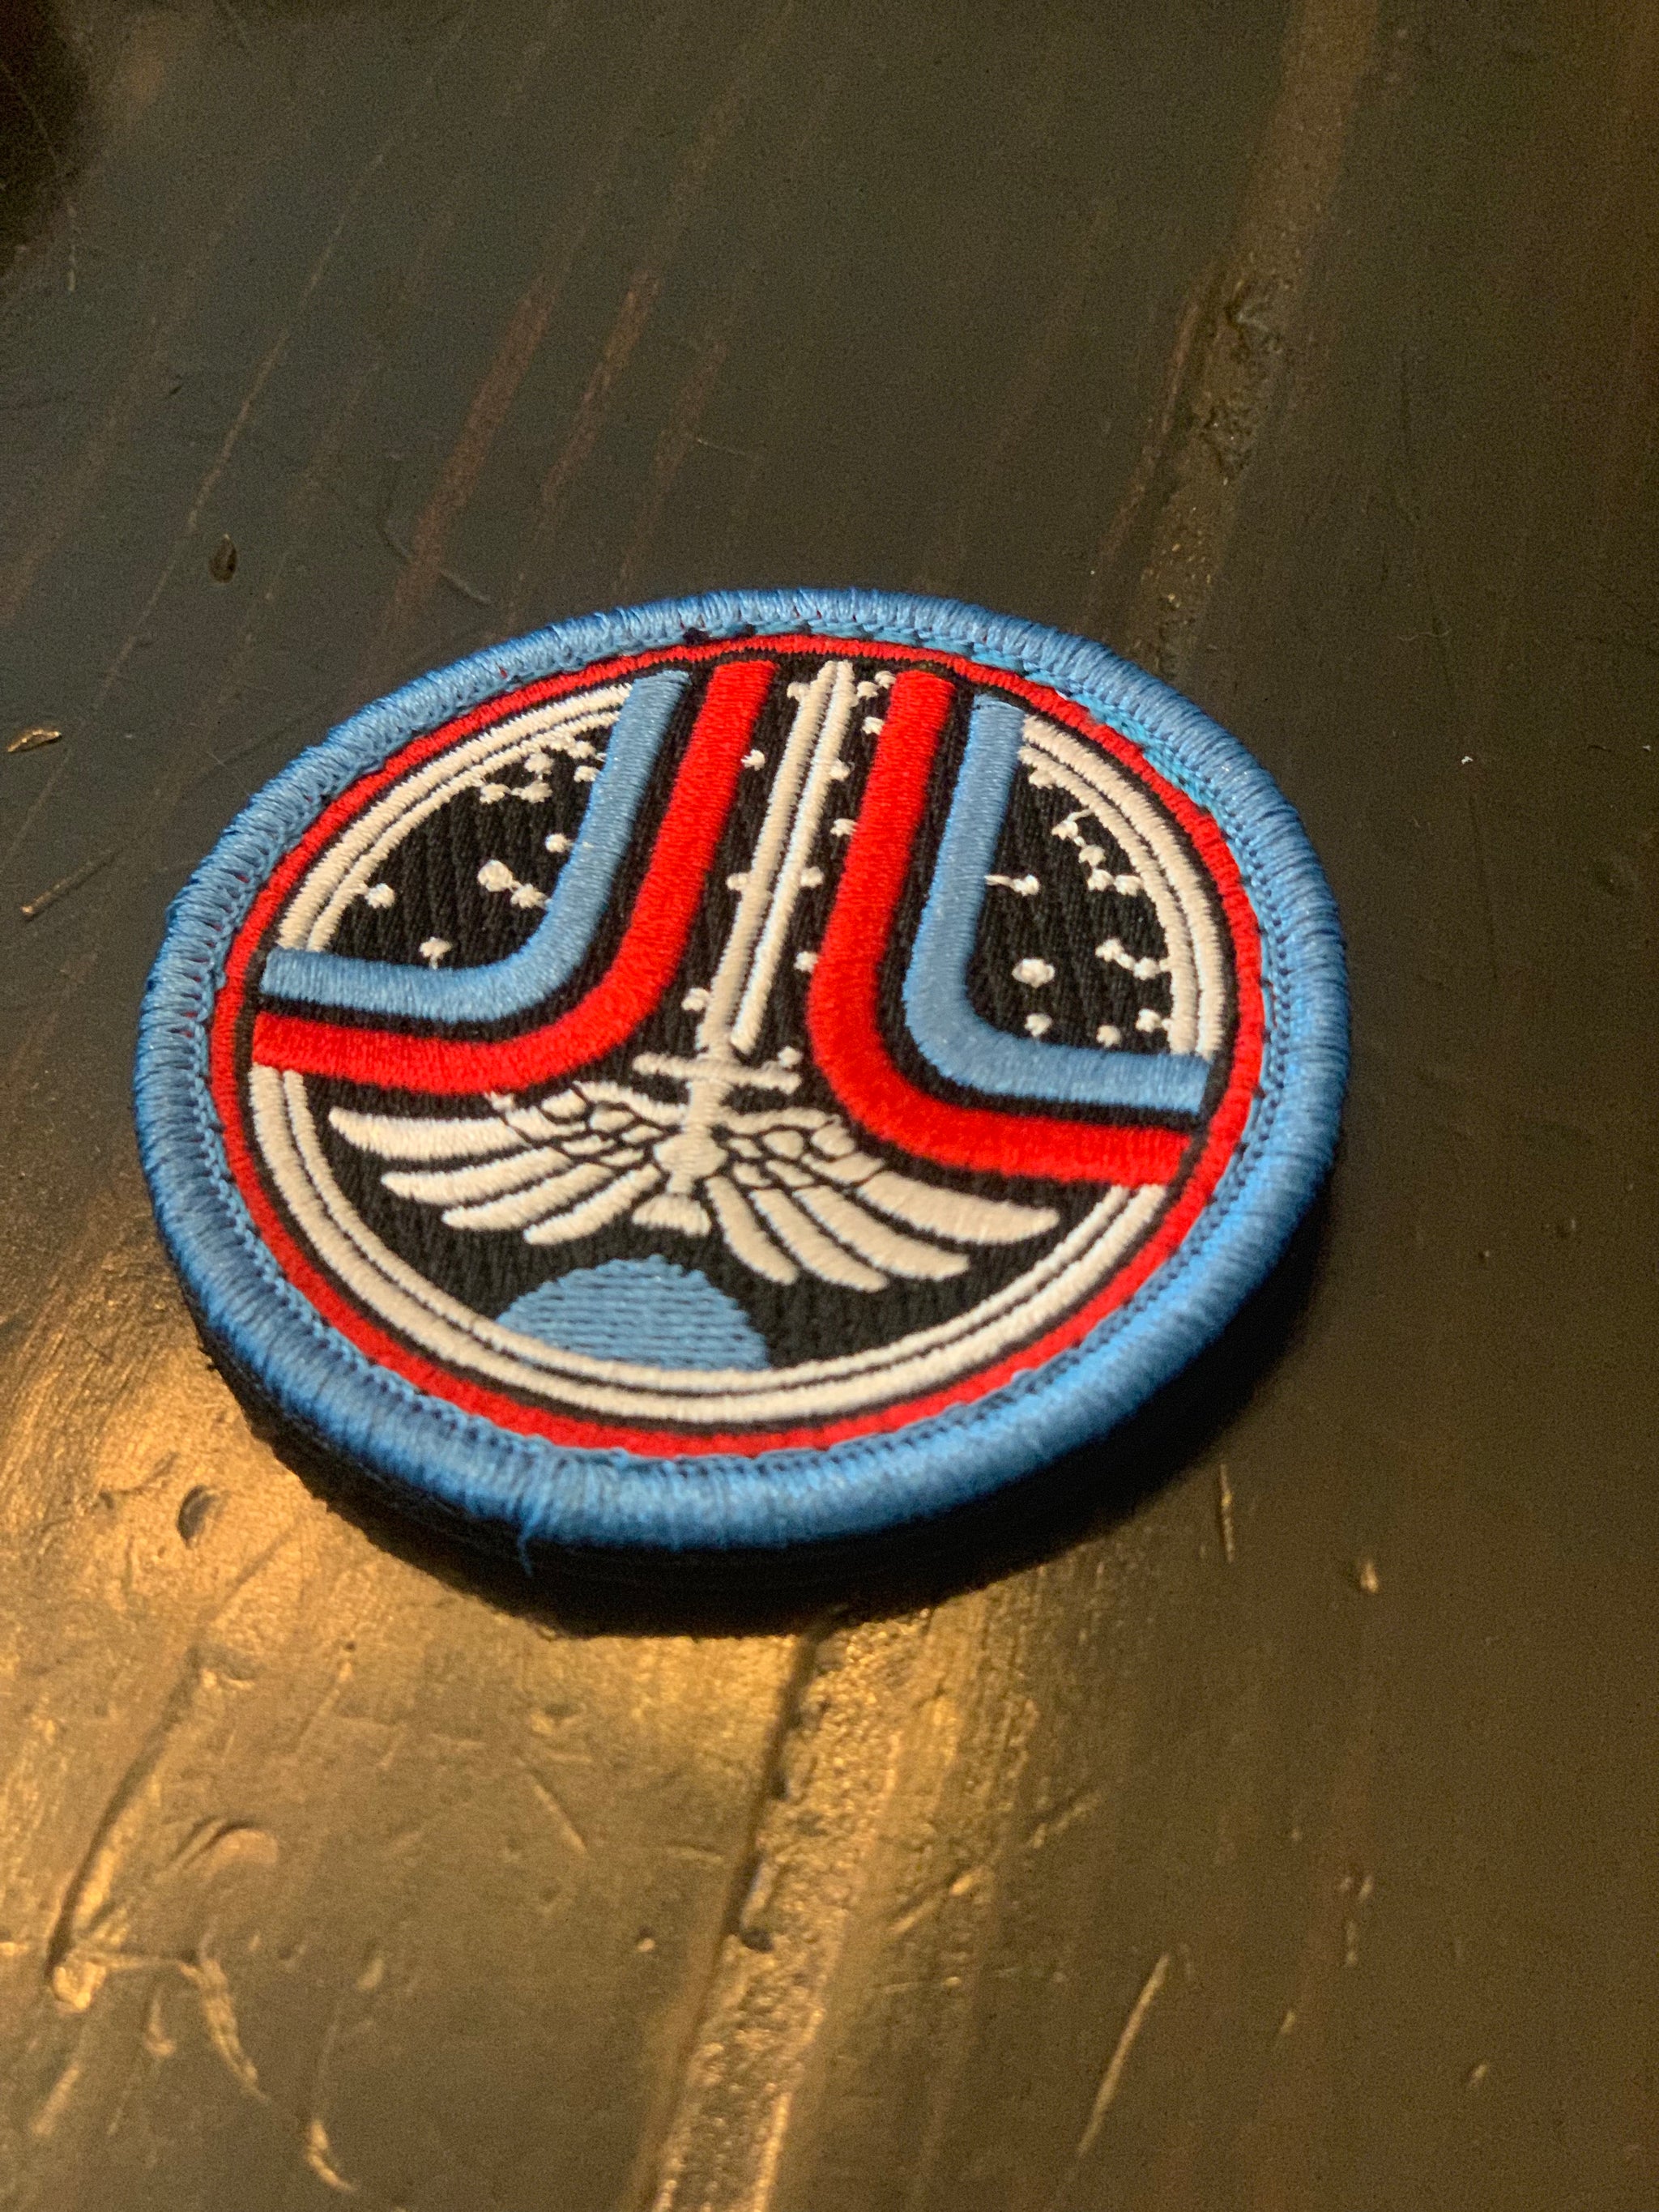 The Last Starfighter Morale Patch -Made in The USA- Tactical Military Funny  Patches